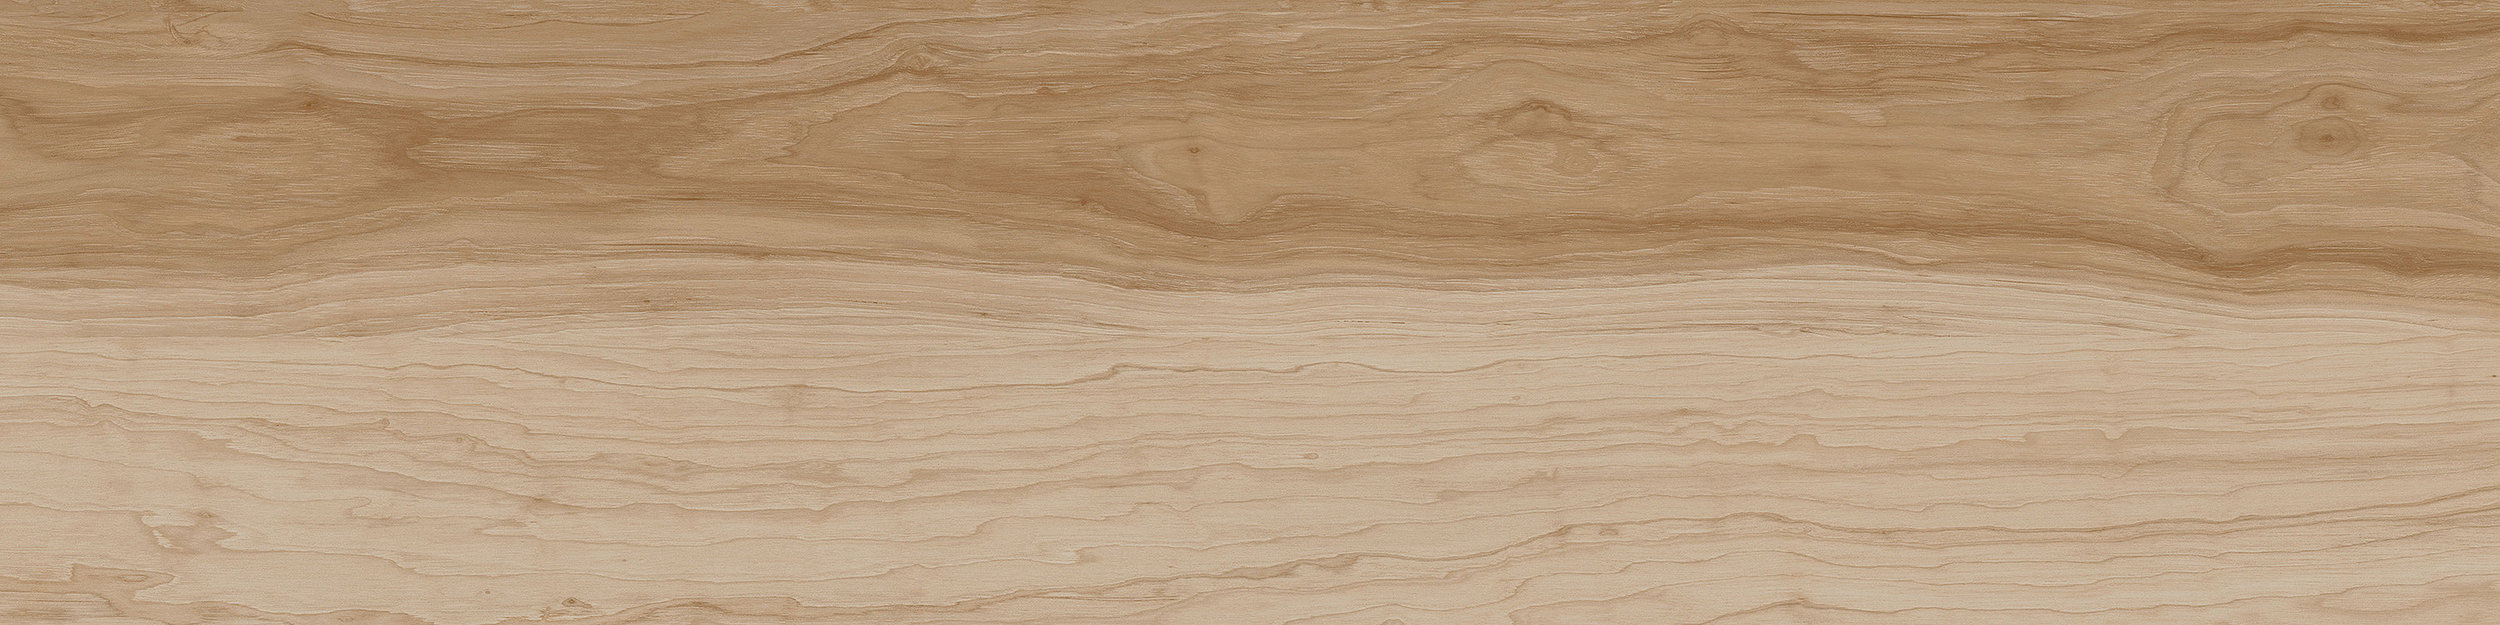 Great Heights LVT in White Oak image number 3